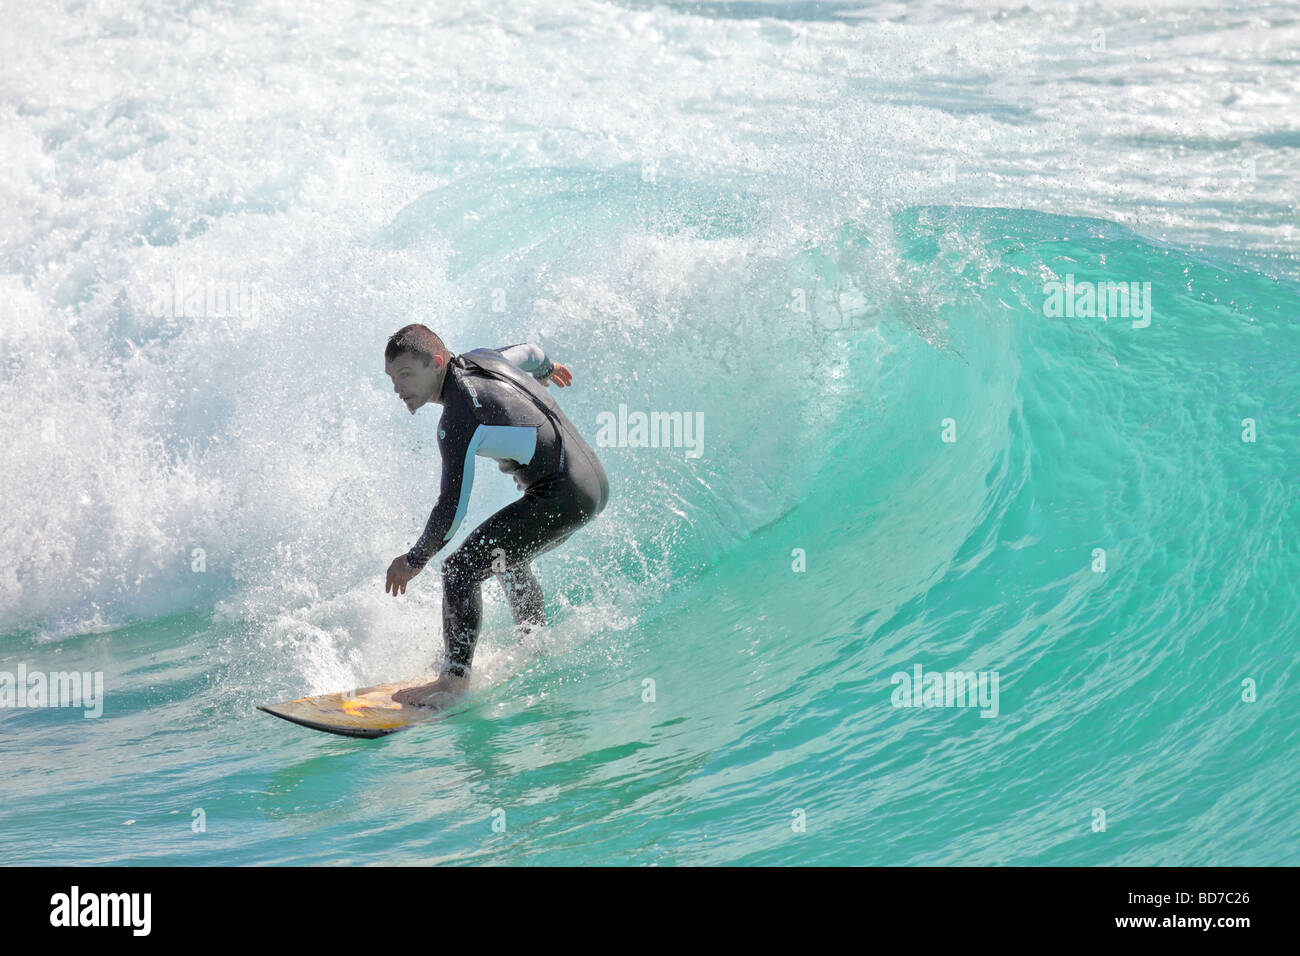 Surfer captures a wave for a ride into the shore late afternoon Stock Photo